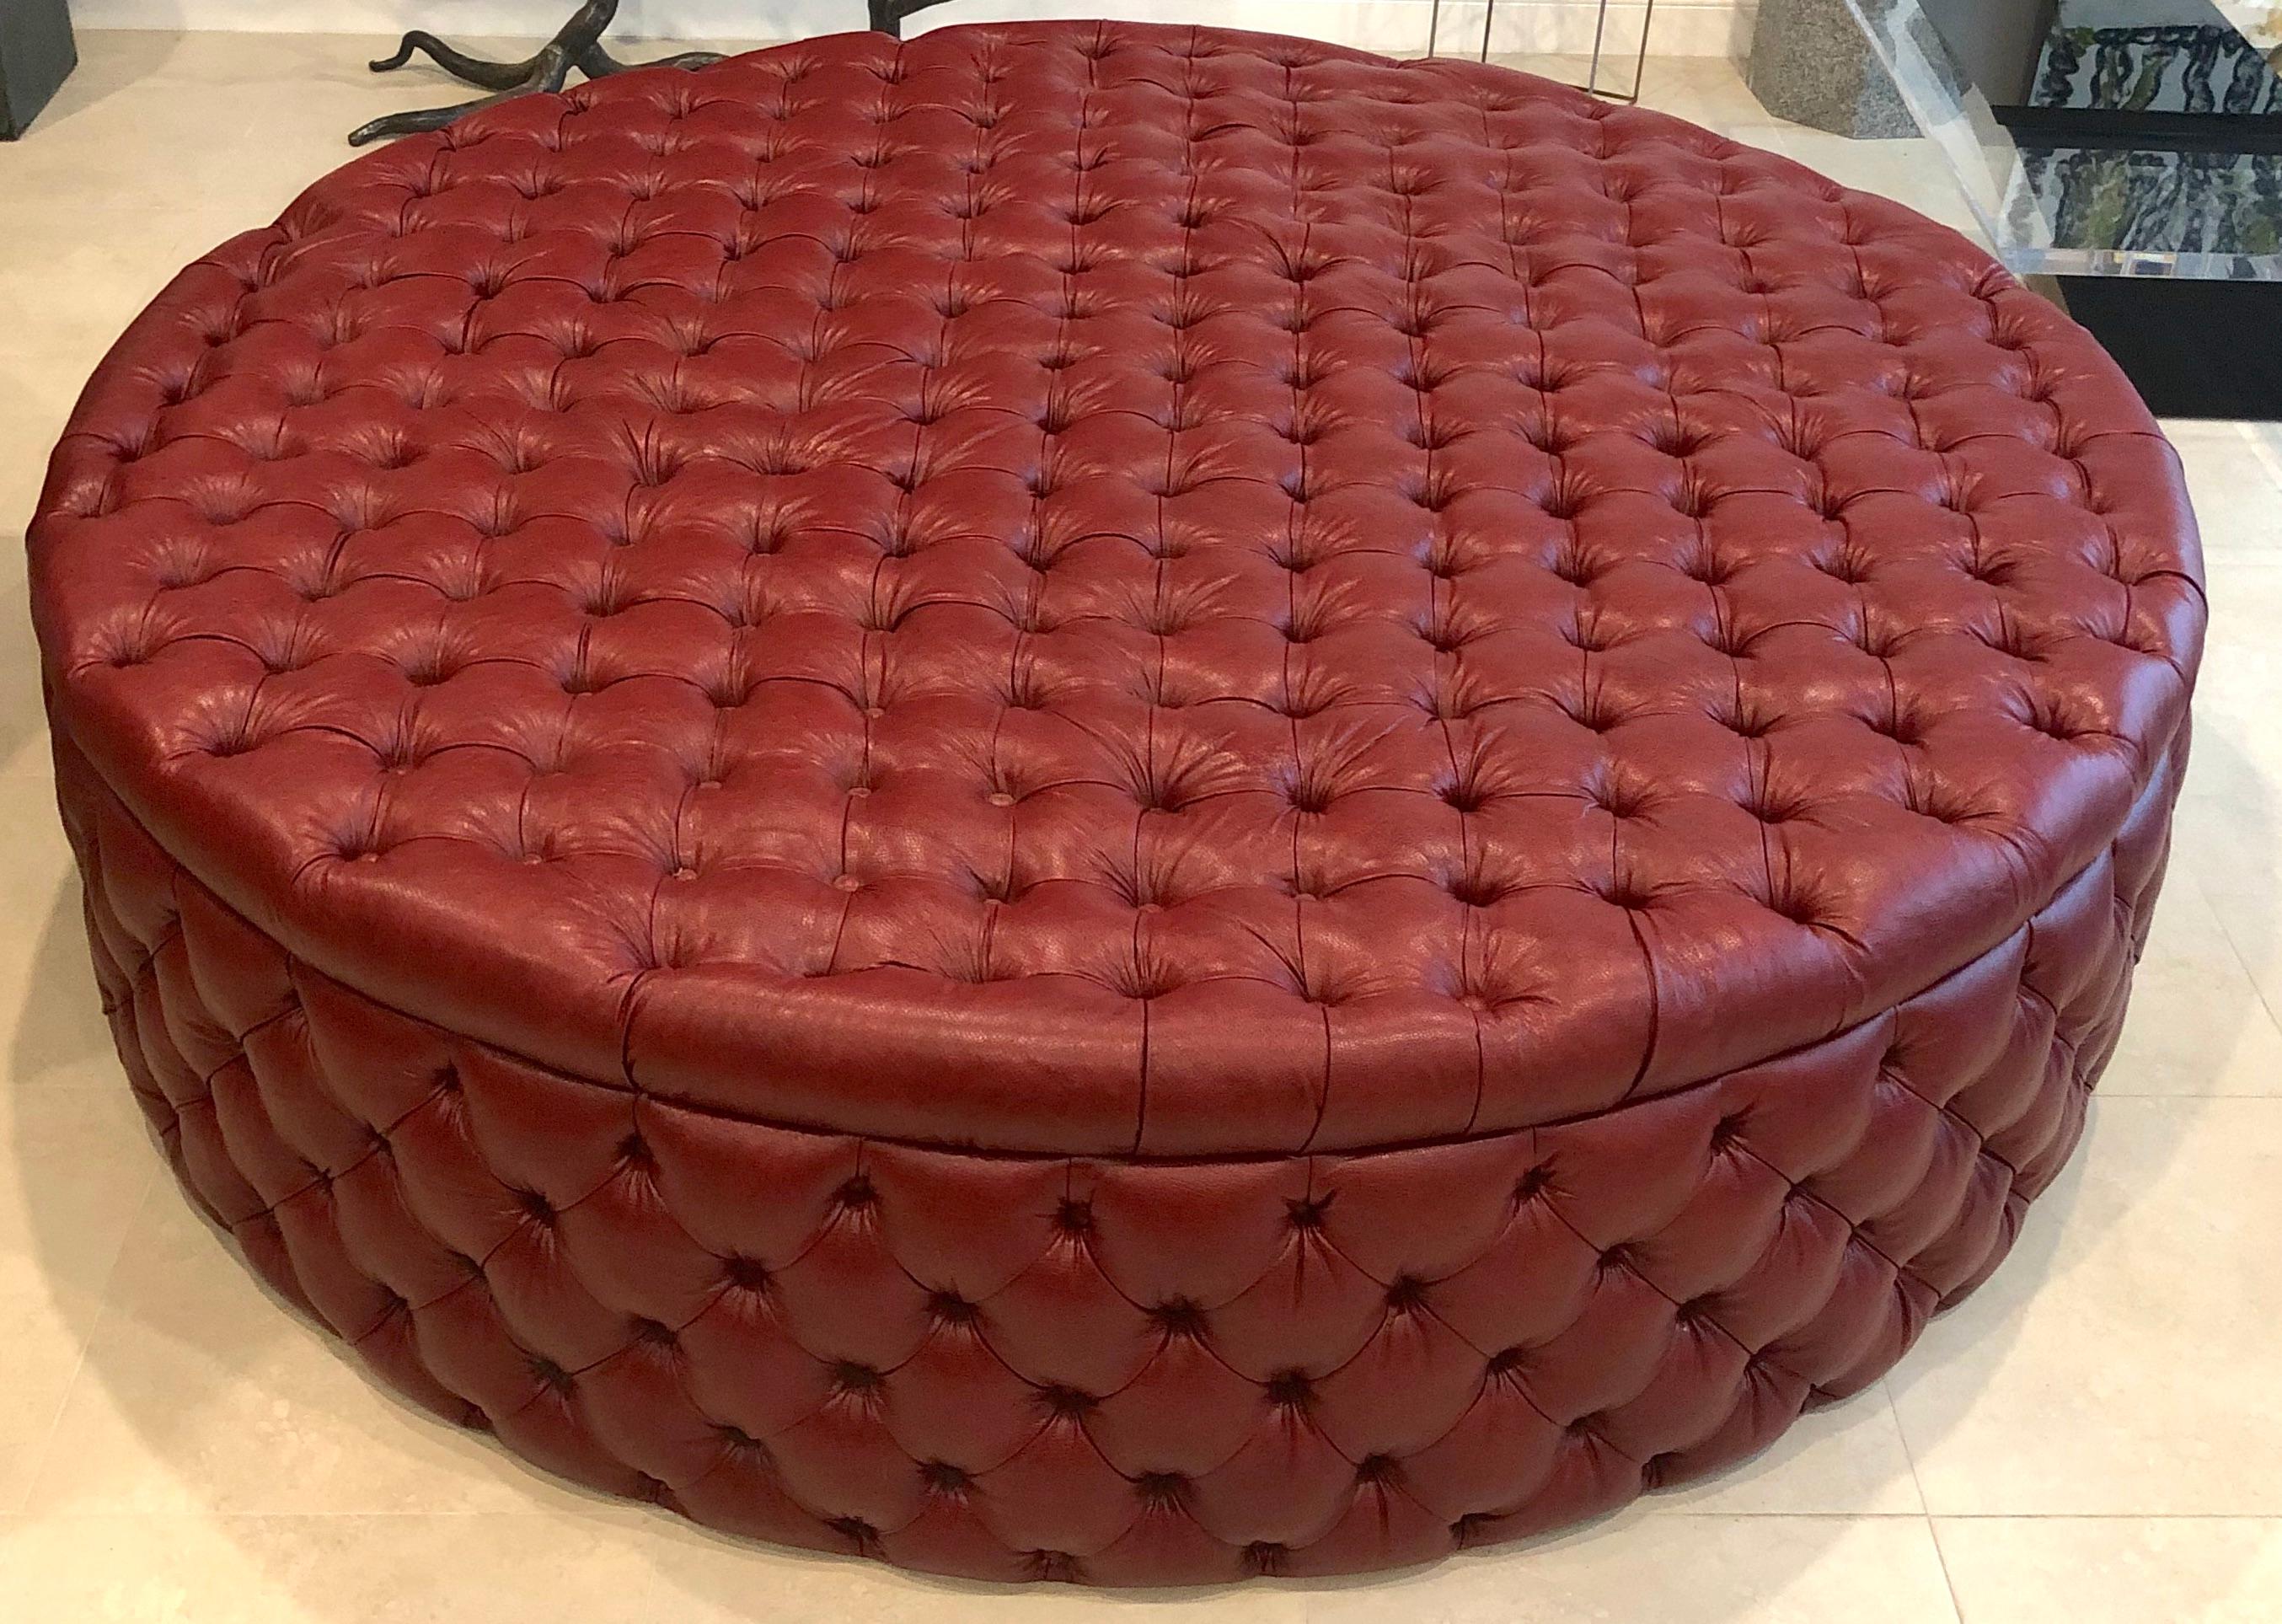 Monumental modern English oxblood leather circular ottoman, beautiful specimen grade oxblood tufted leather on a 80-inch diameter x 22-inch high framed ottoman. A hard to find, large scale previously owned custom made ottoman. One piece construction.